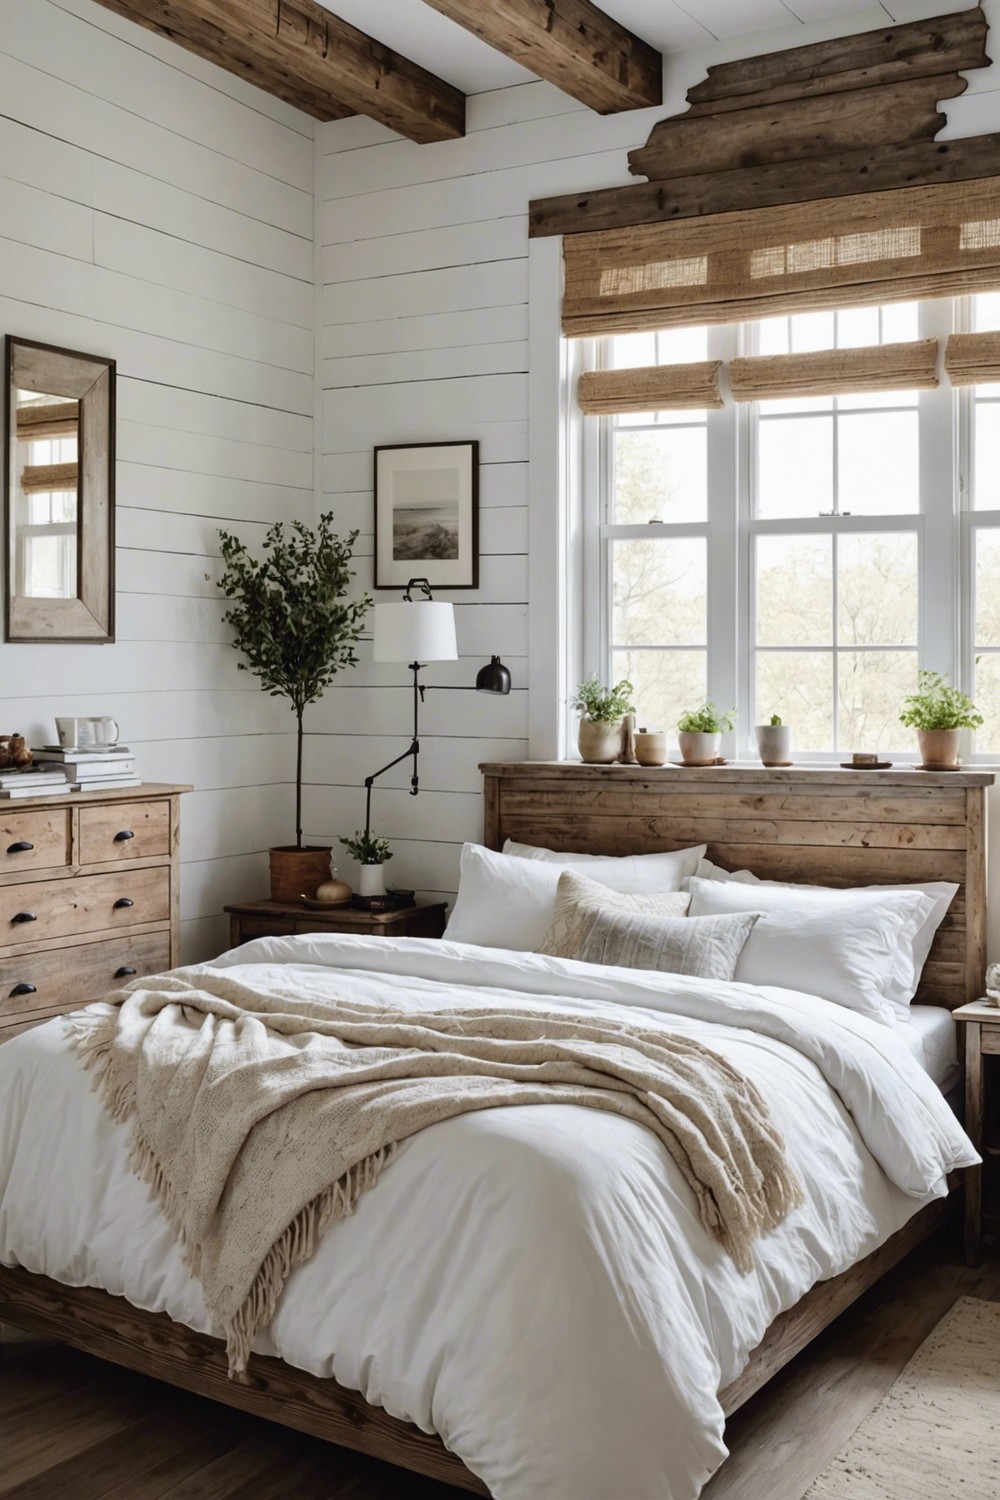 Rustic Charm: White Bedroom with Distressed Wood Accents